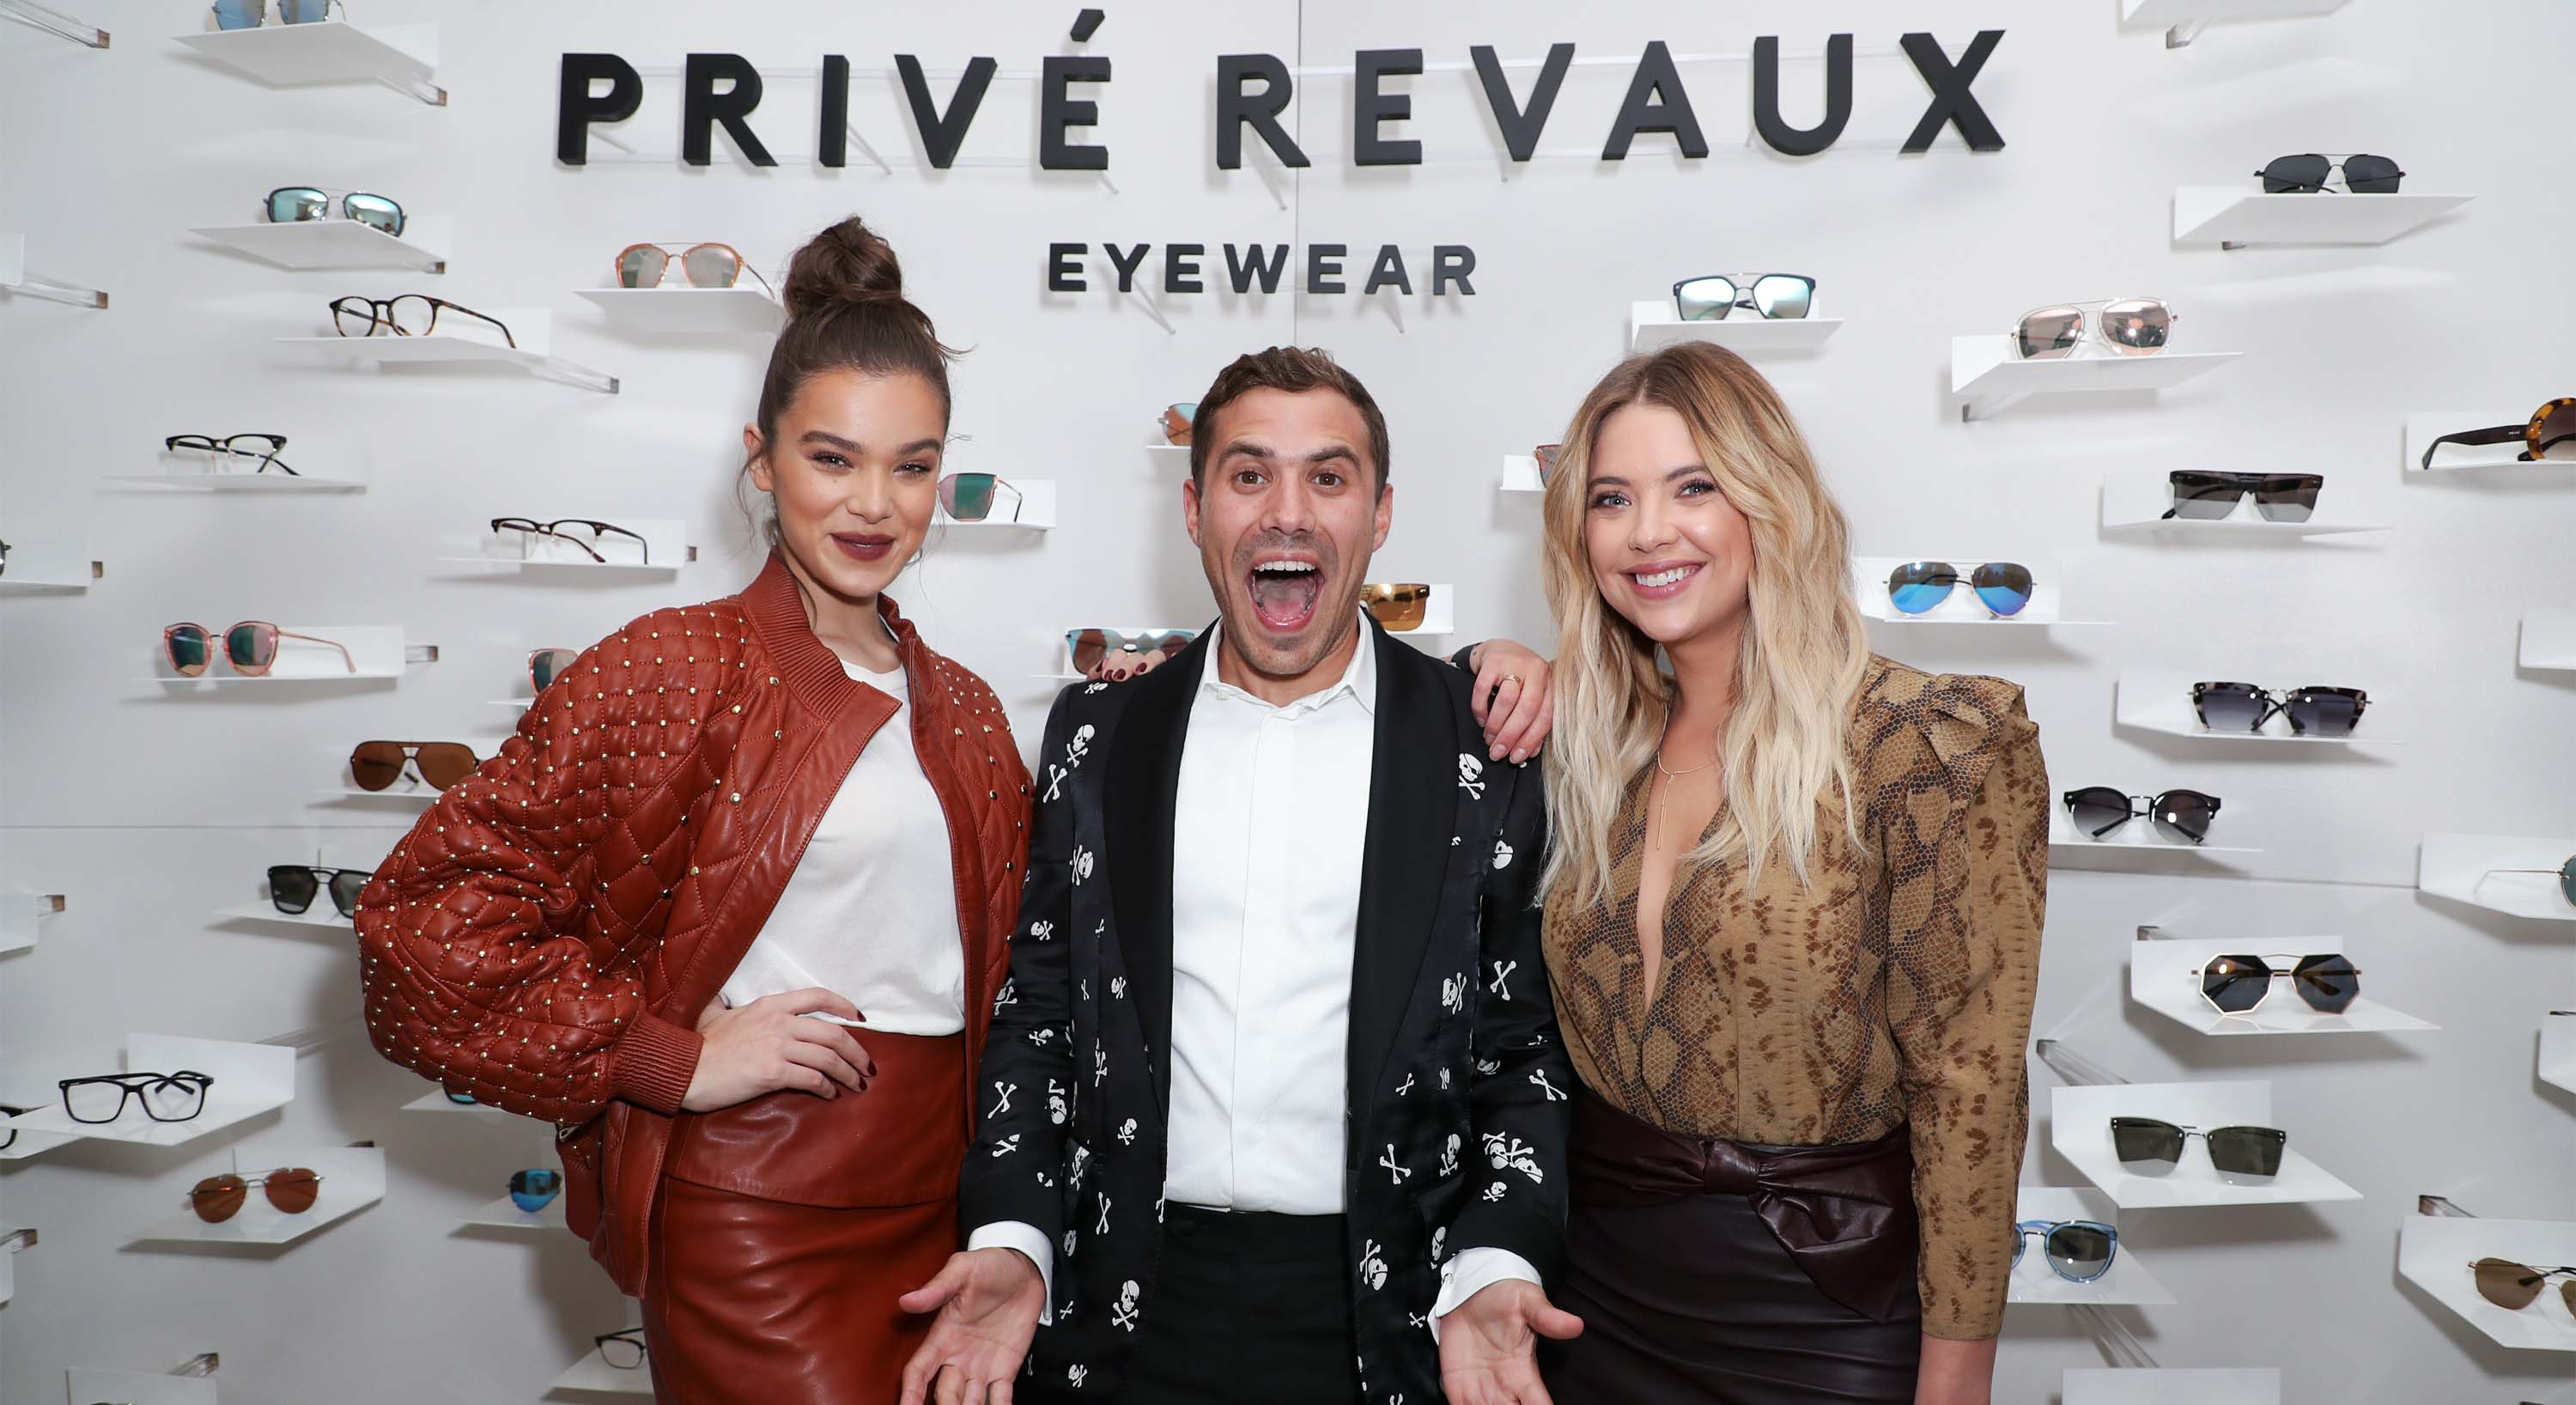 Hailee Steinfeld attends Prive Revaux Launch Event